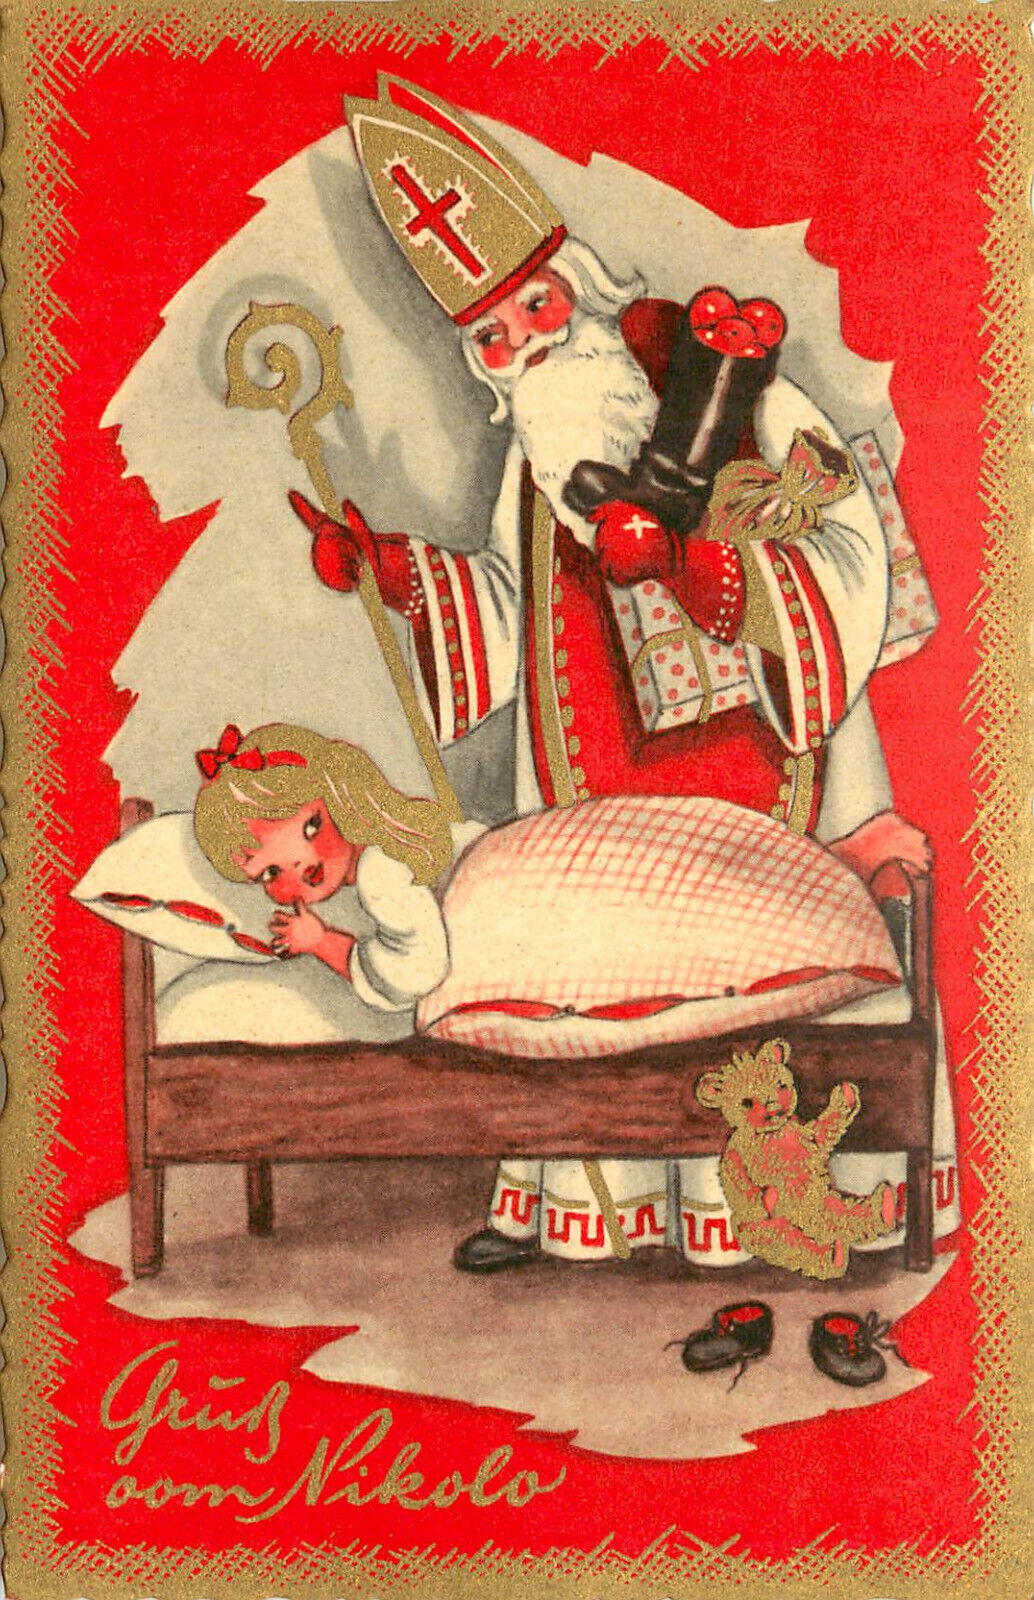 Gruss Vom St. Nicholas Christmas Postcard Santa Claus With Gifts For Little Girl